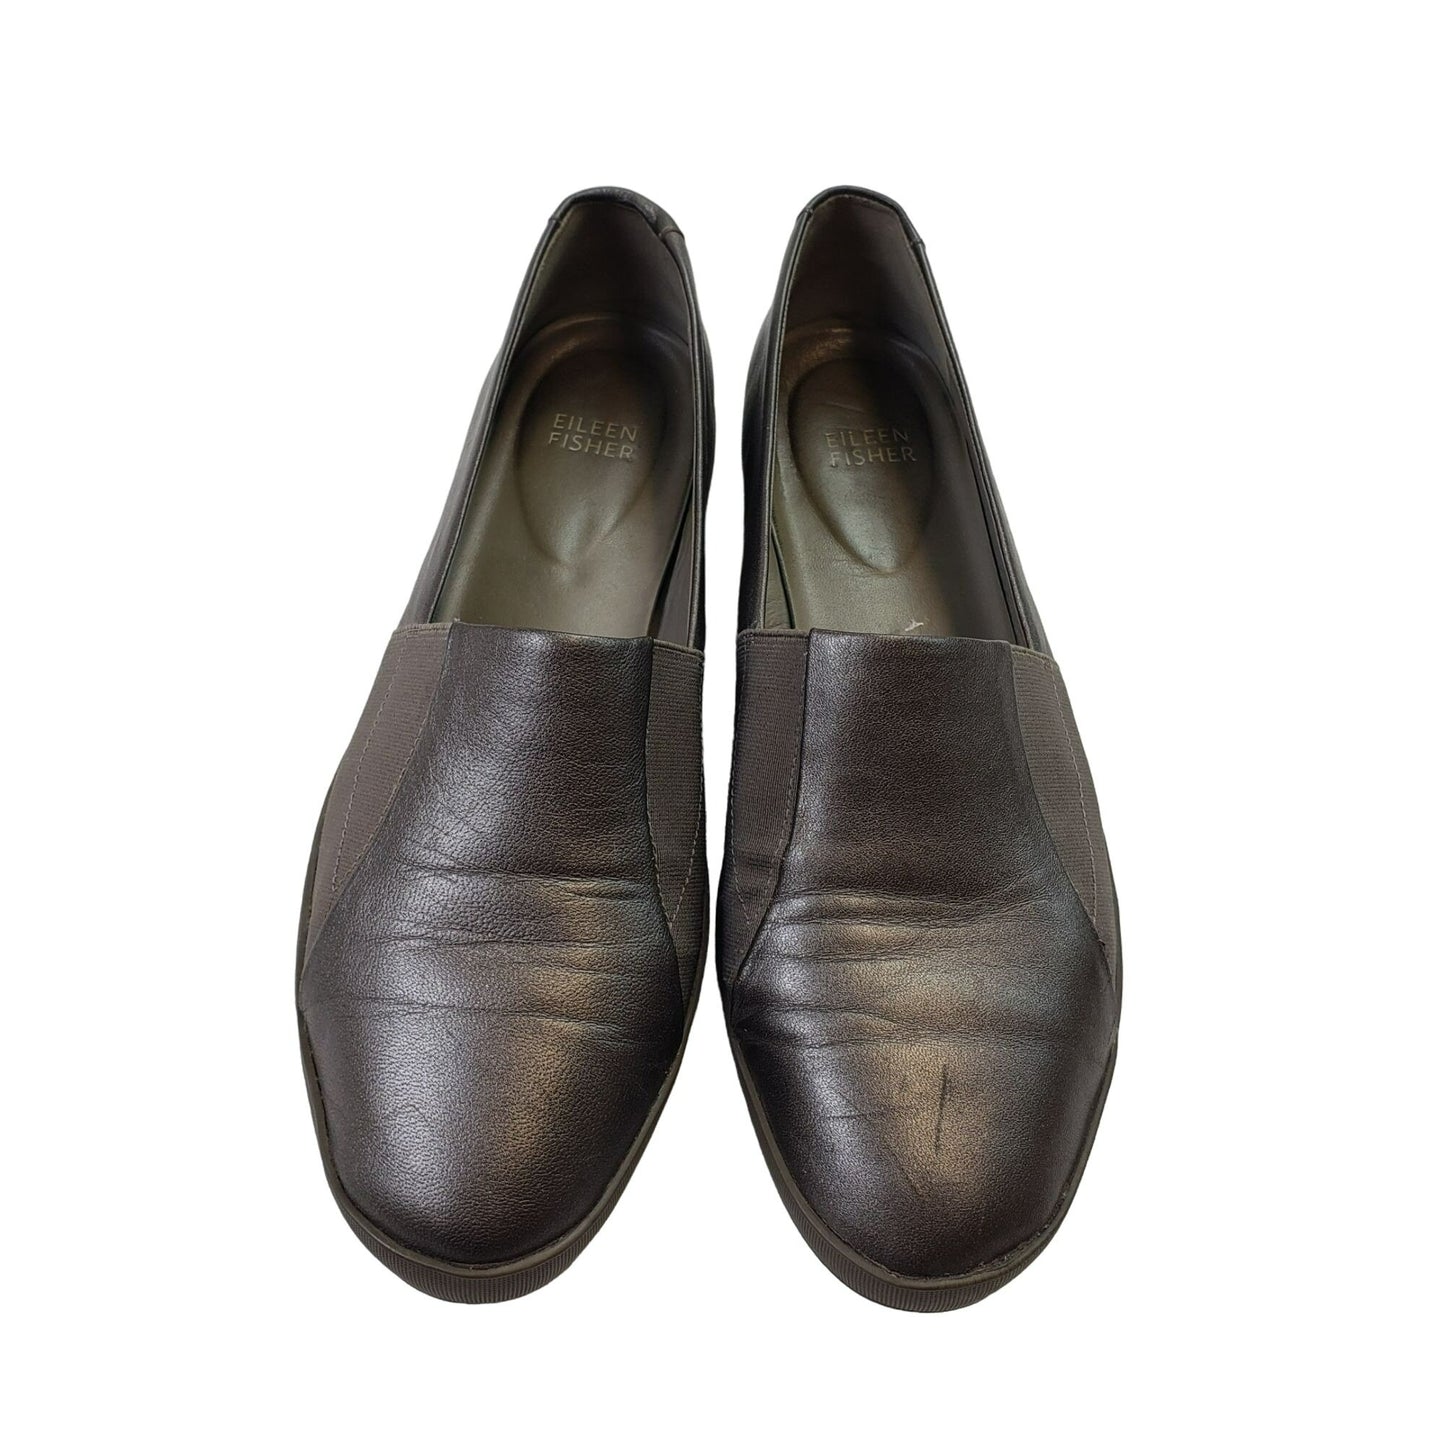 Eileen Fisher Metallic Stretch Leather Loafer Size 10